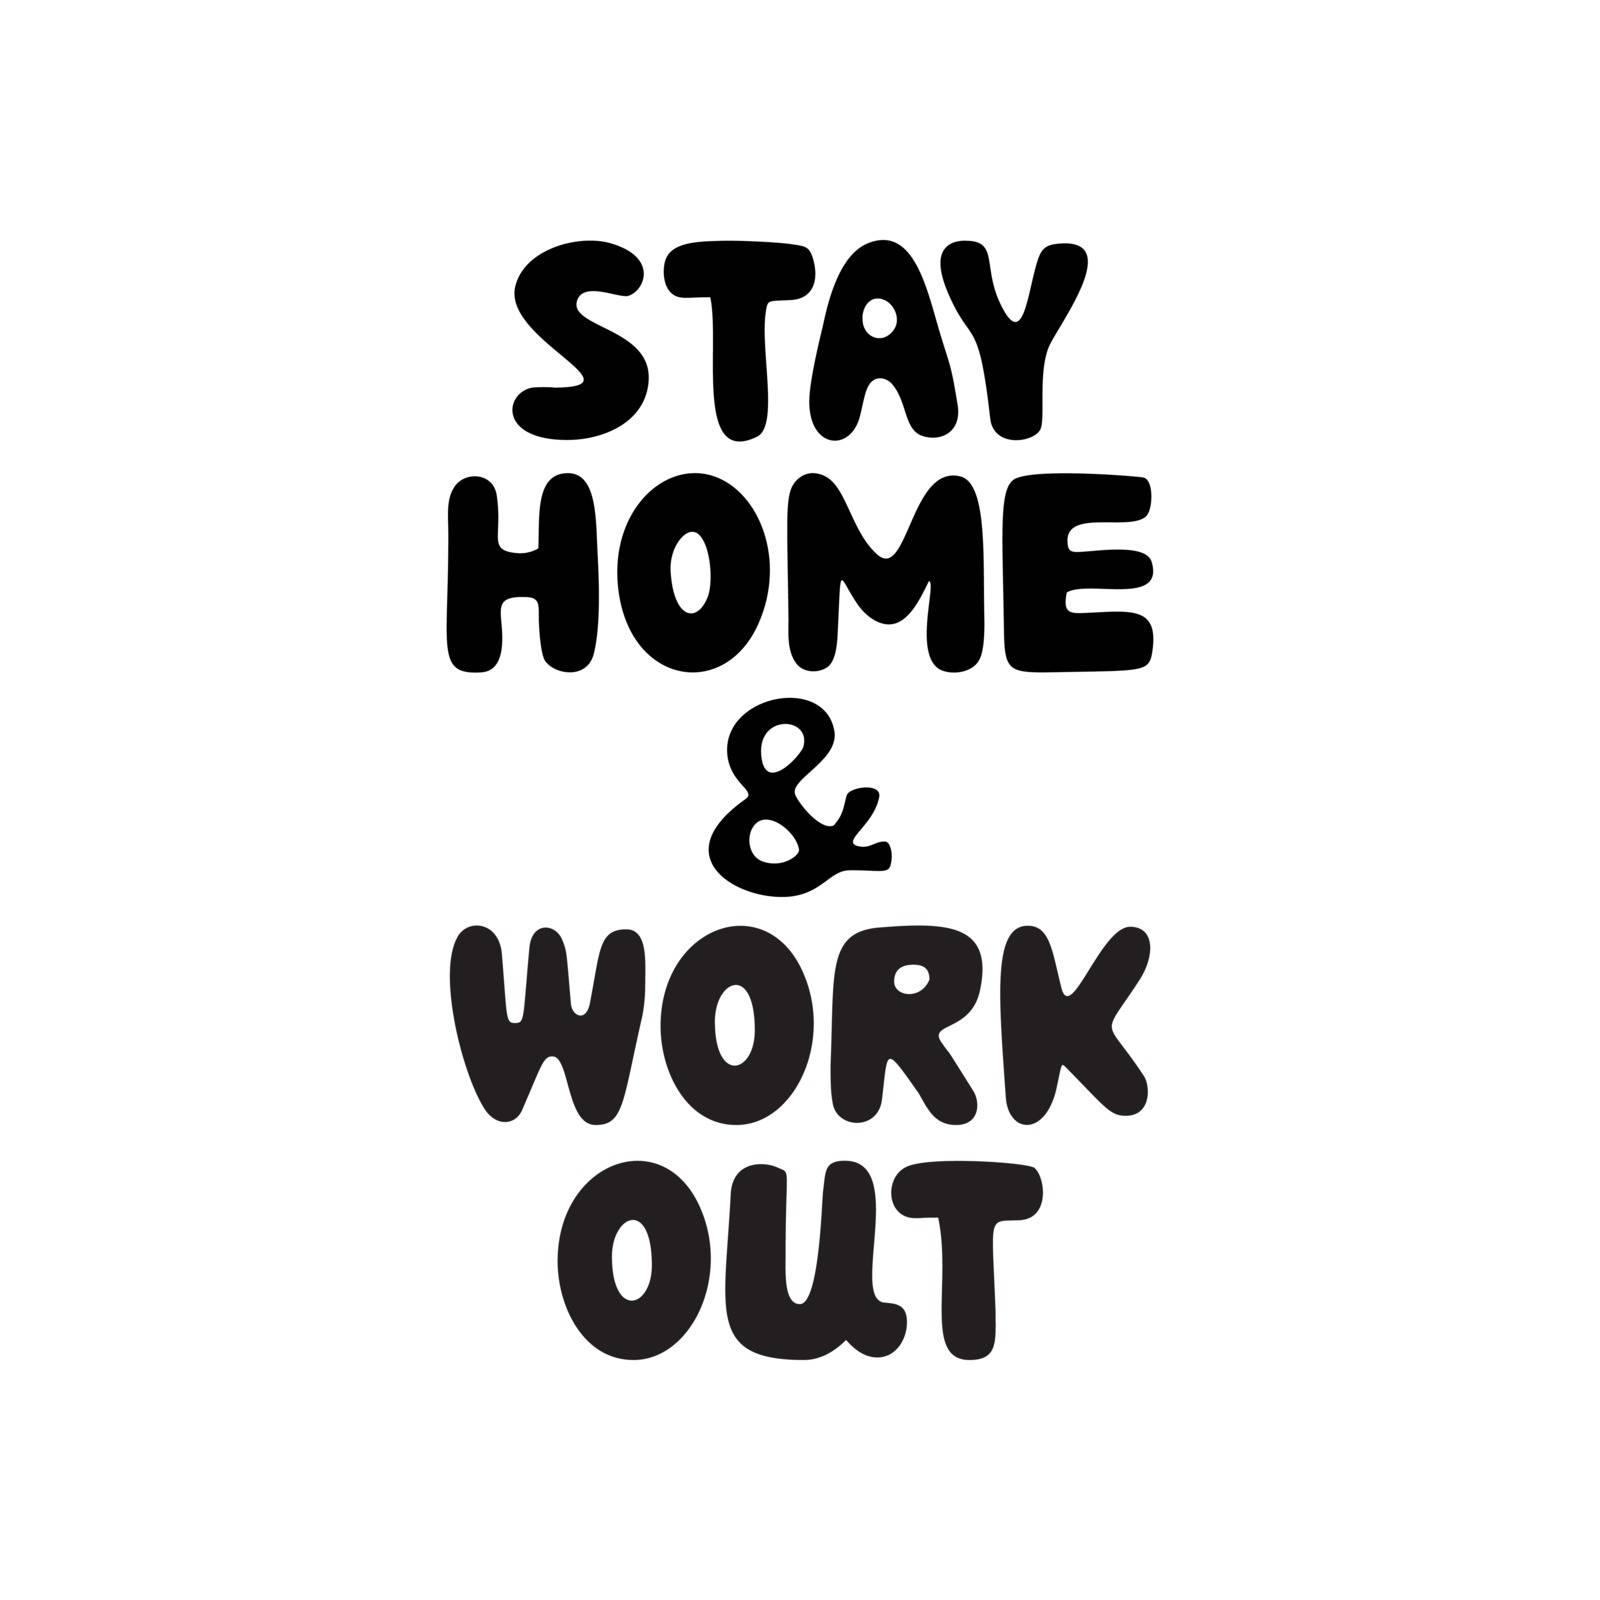 Stay home and work out. Cute hand drawn doodle bubble lettering. Isolated on white. Vector stock illustration.